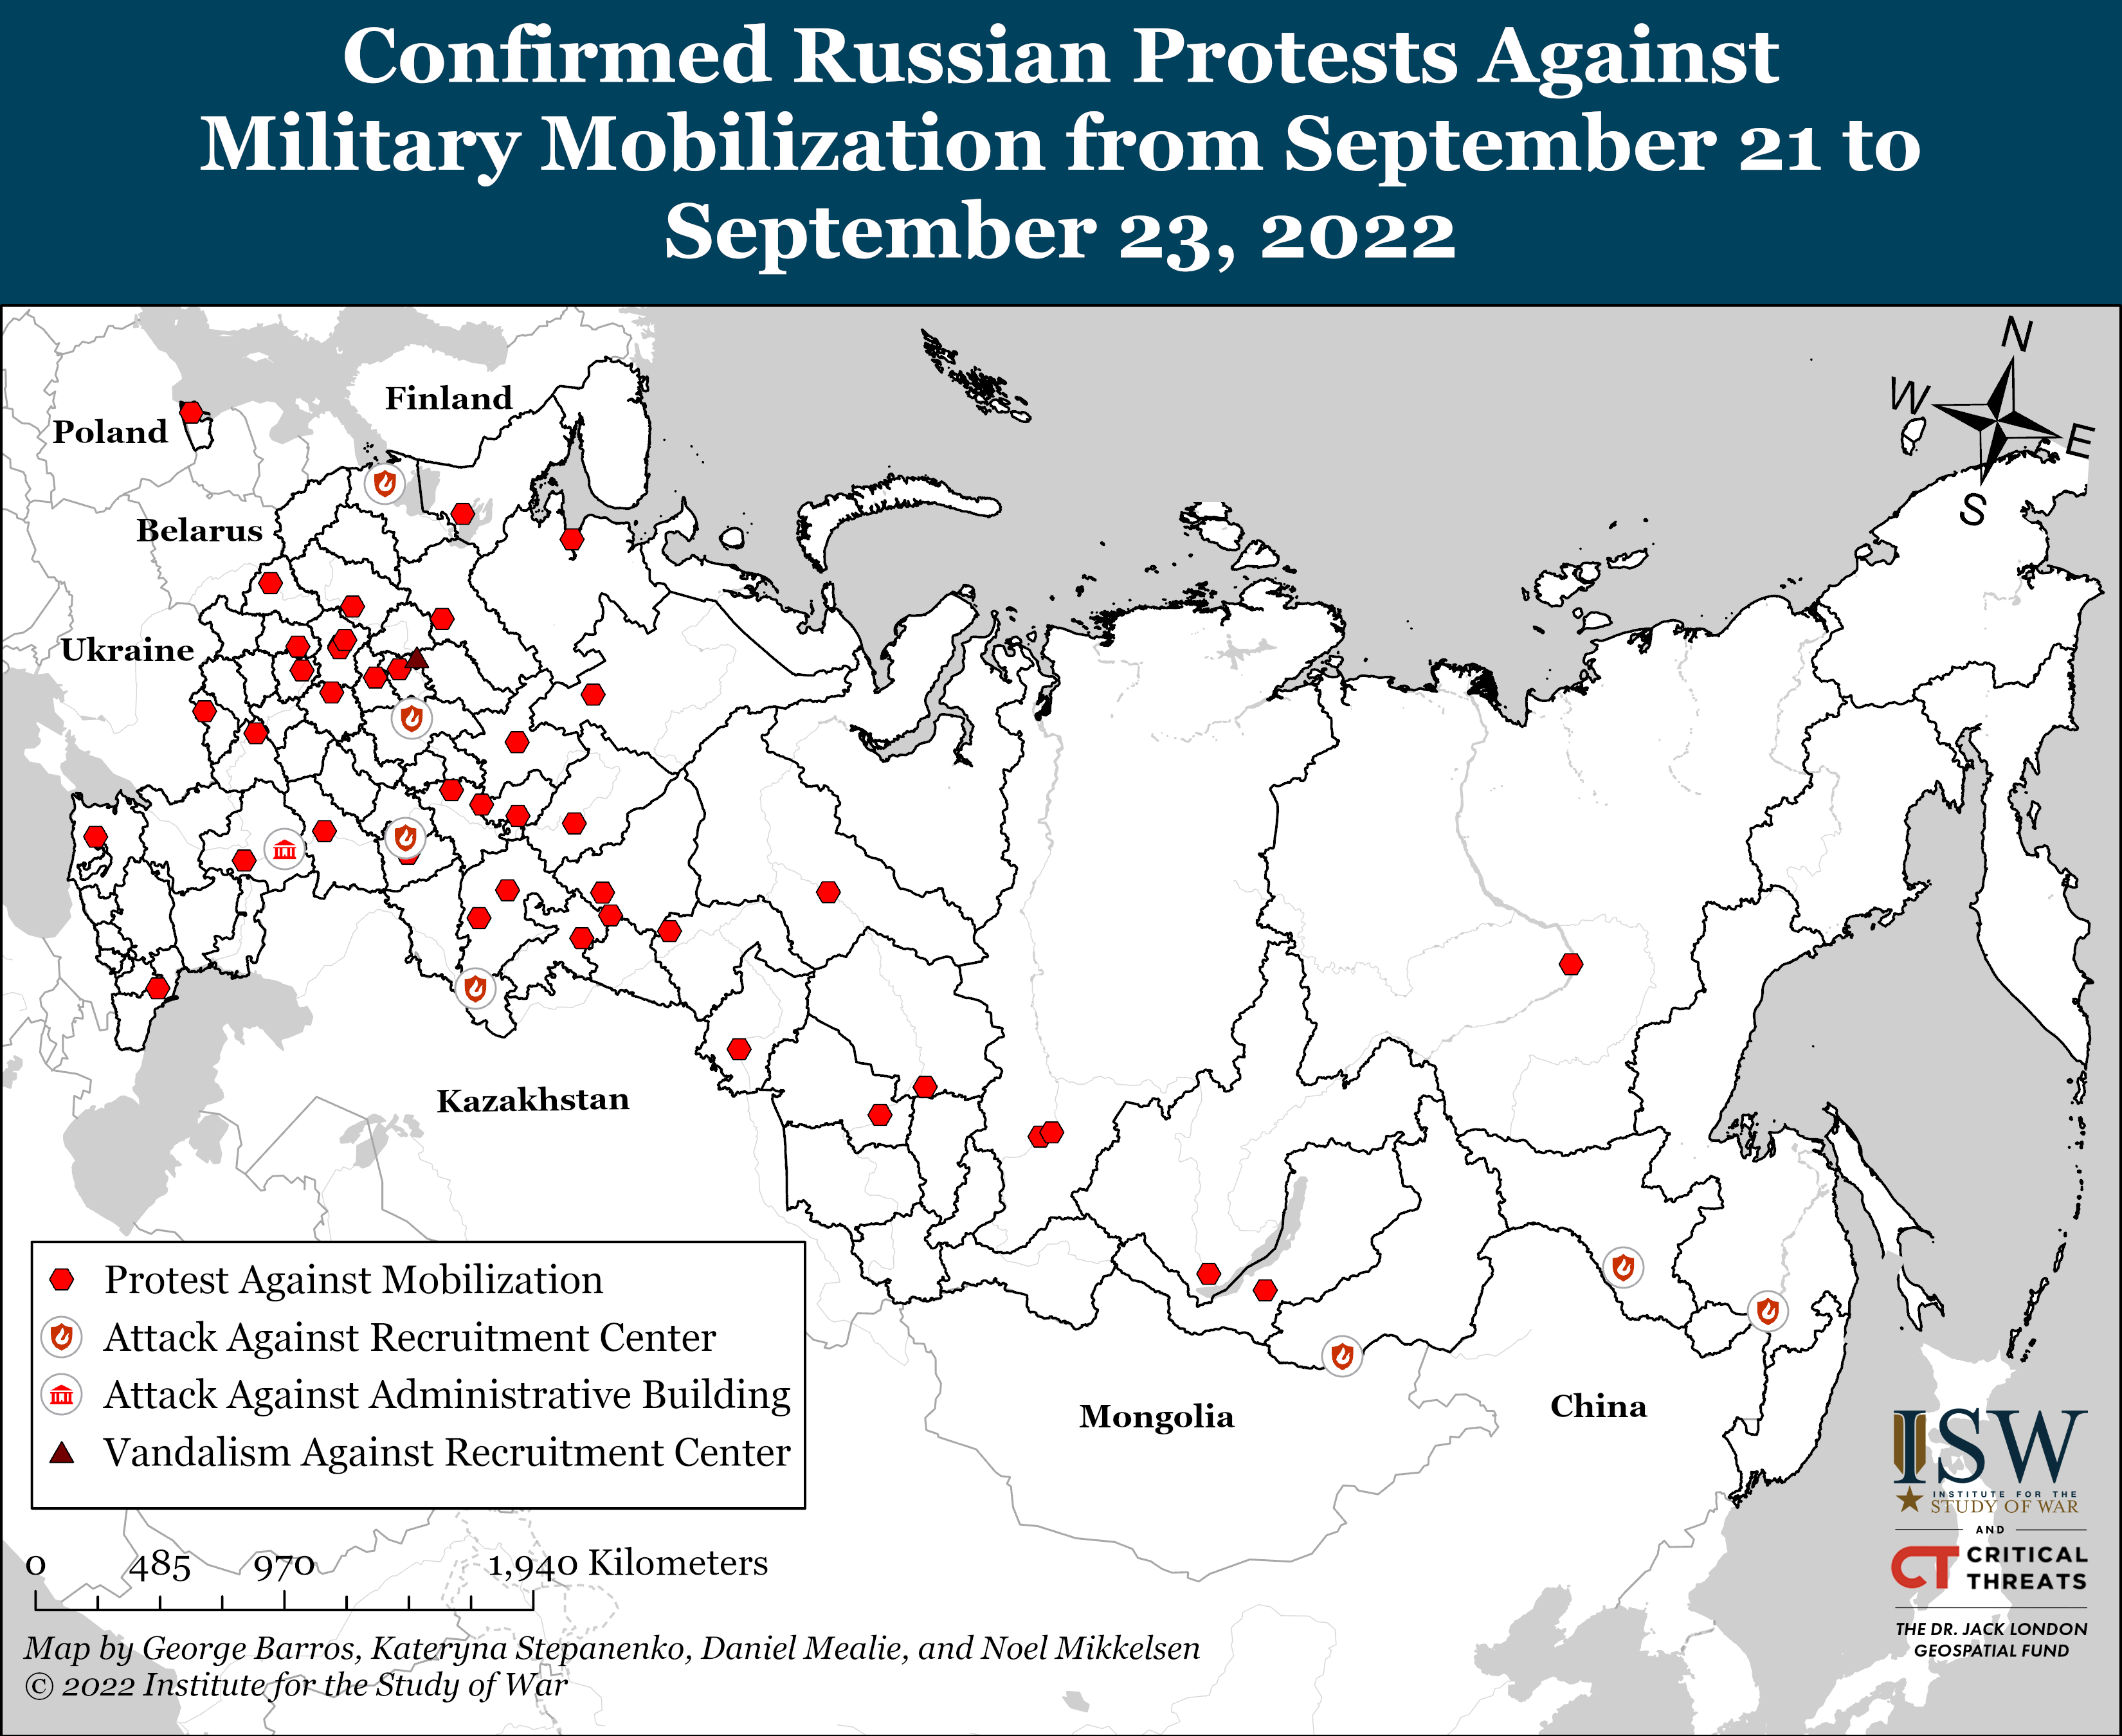 Russian%20Protests%20Agaisnt%20Mobilization%20September%2021%20-%2023%2C%202022.png